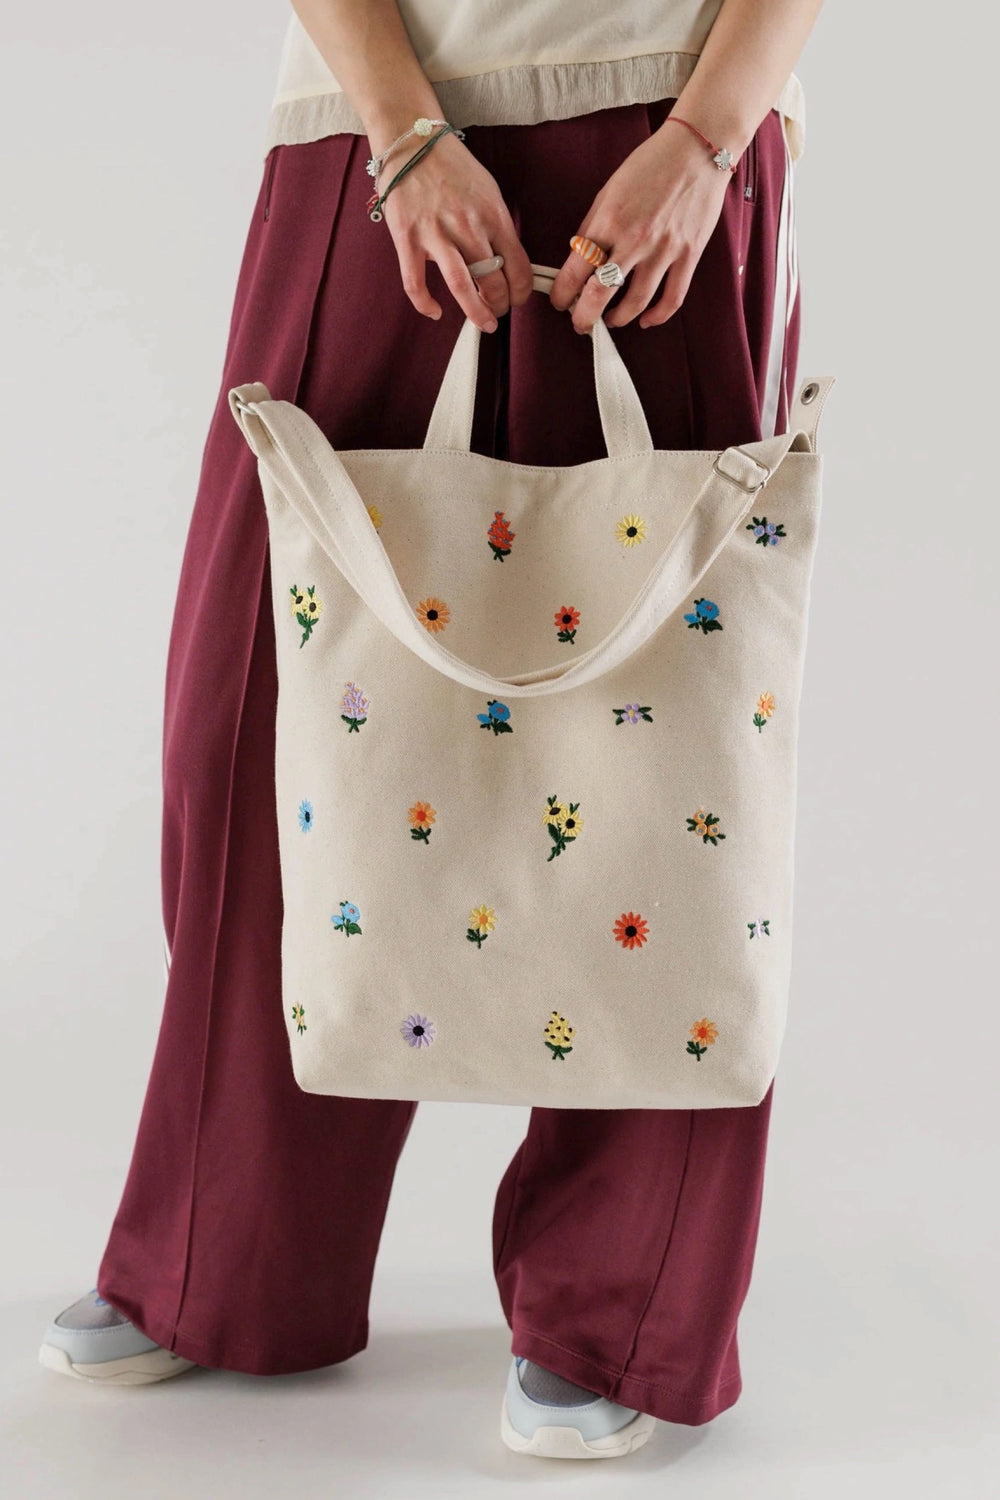 Embroidered Ditsy Floral Duck Bag